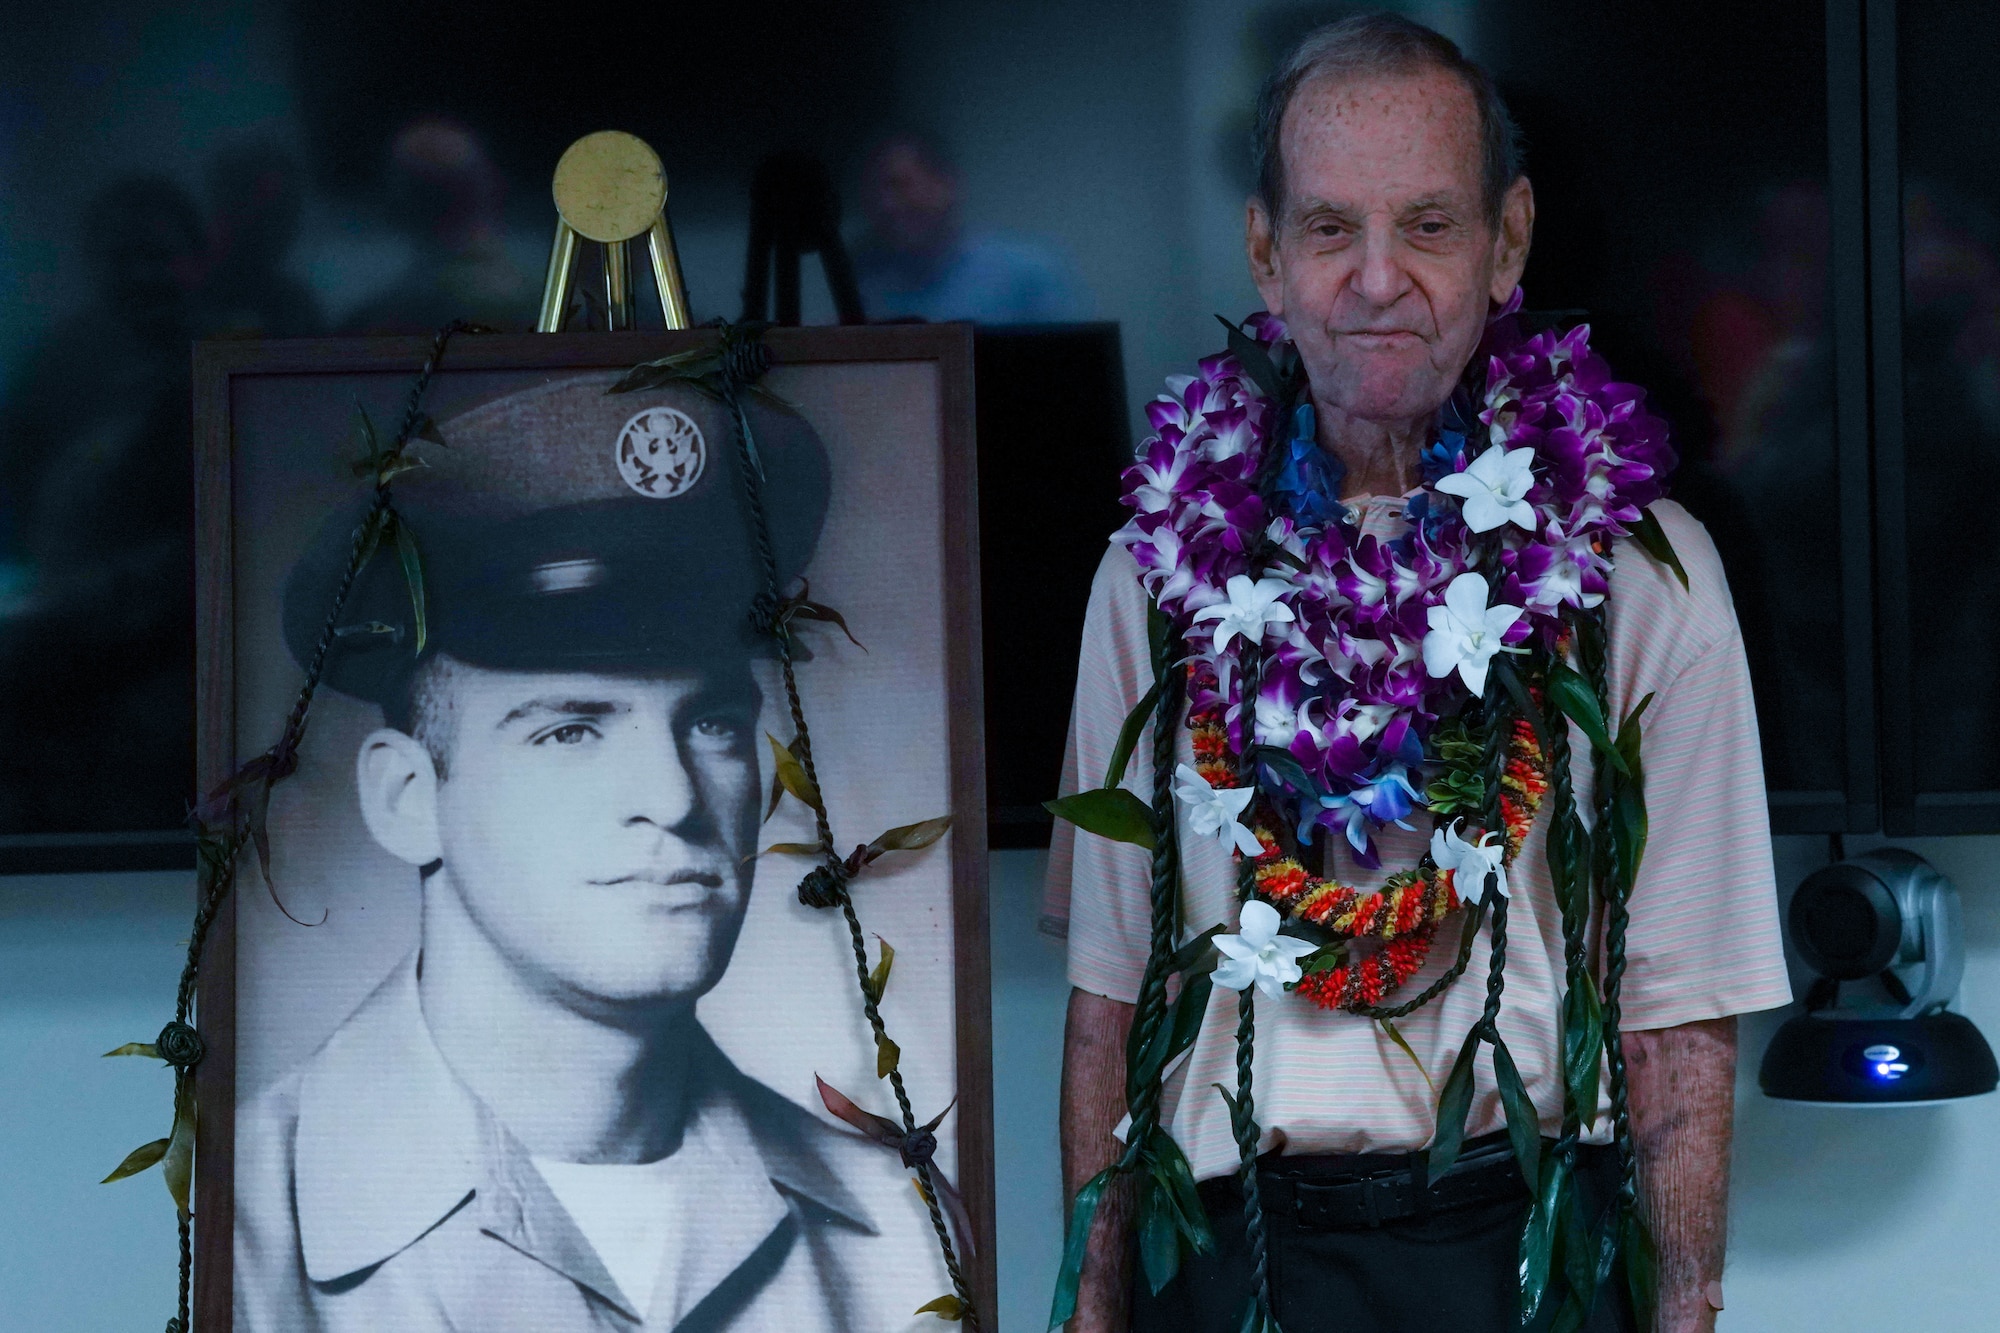 Retired Chief Master Sgt. Joel Shaw, 647th Air Base Group resource advisor, attends a ceremony to rename the 15th Wing conference room the Shaw Conference Room at Joint Base Pearl Harbor-Hickam, Hawaii, Oct. 22, 2021. Shaw enlisted into the Air Force in 1958 and after serving in the Pacific theater of operations during the Vietnam War, retired in 1989 from active duty as a chief master sergeant and pursued a career in federal service. (U.S. Air Force photo by Airman 1st Class Makensie Cooper)